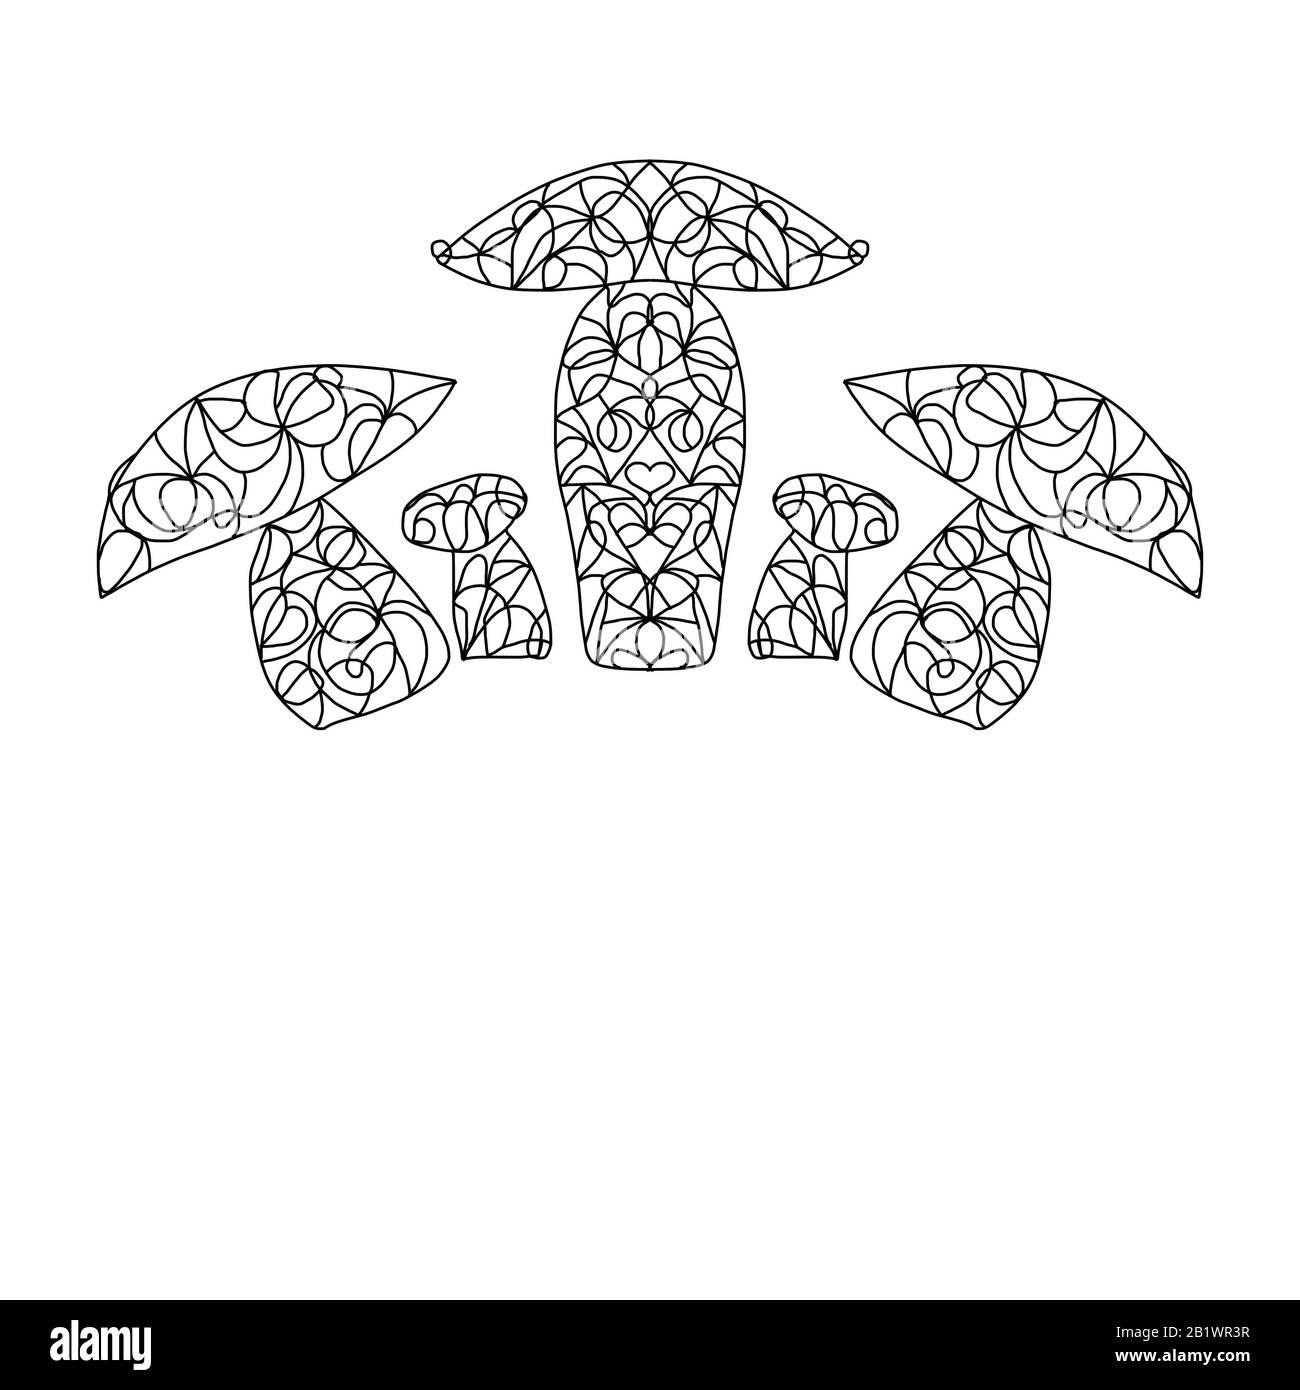 Five mushrooms of different sizes with a symmetrical ornament for coloring. Stock Photo